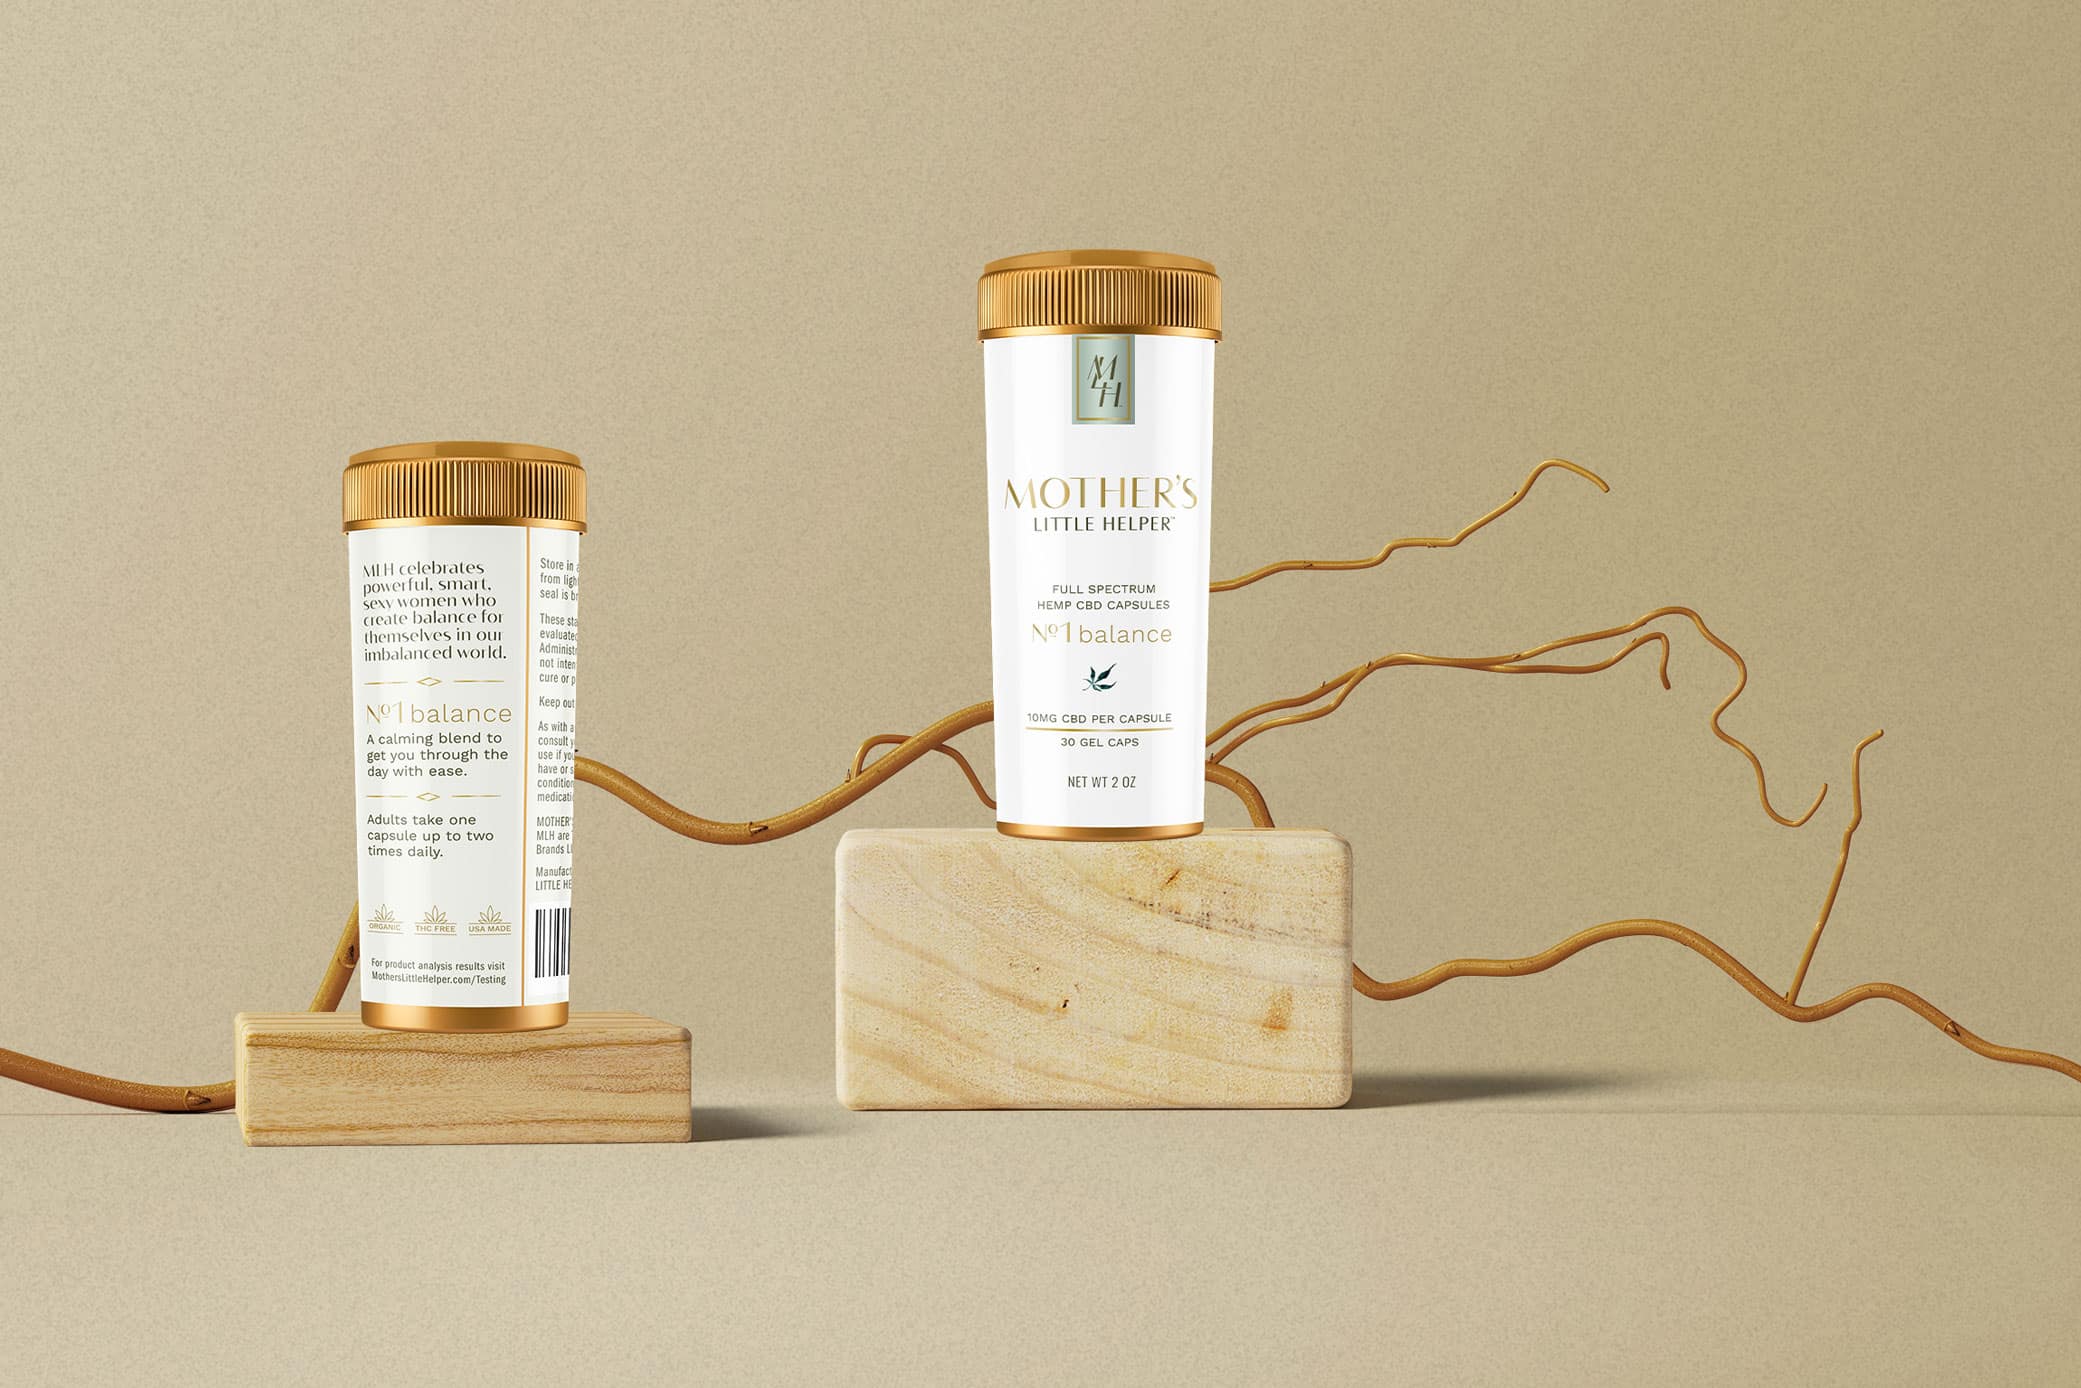 Mother’s Little Helper CBD packaging design for CBD supplements with gold lid, and pharmaceutical styled white bottle.